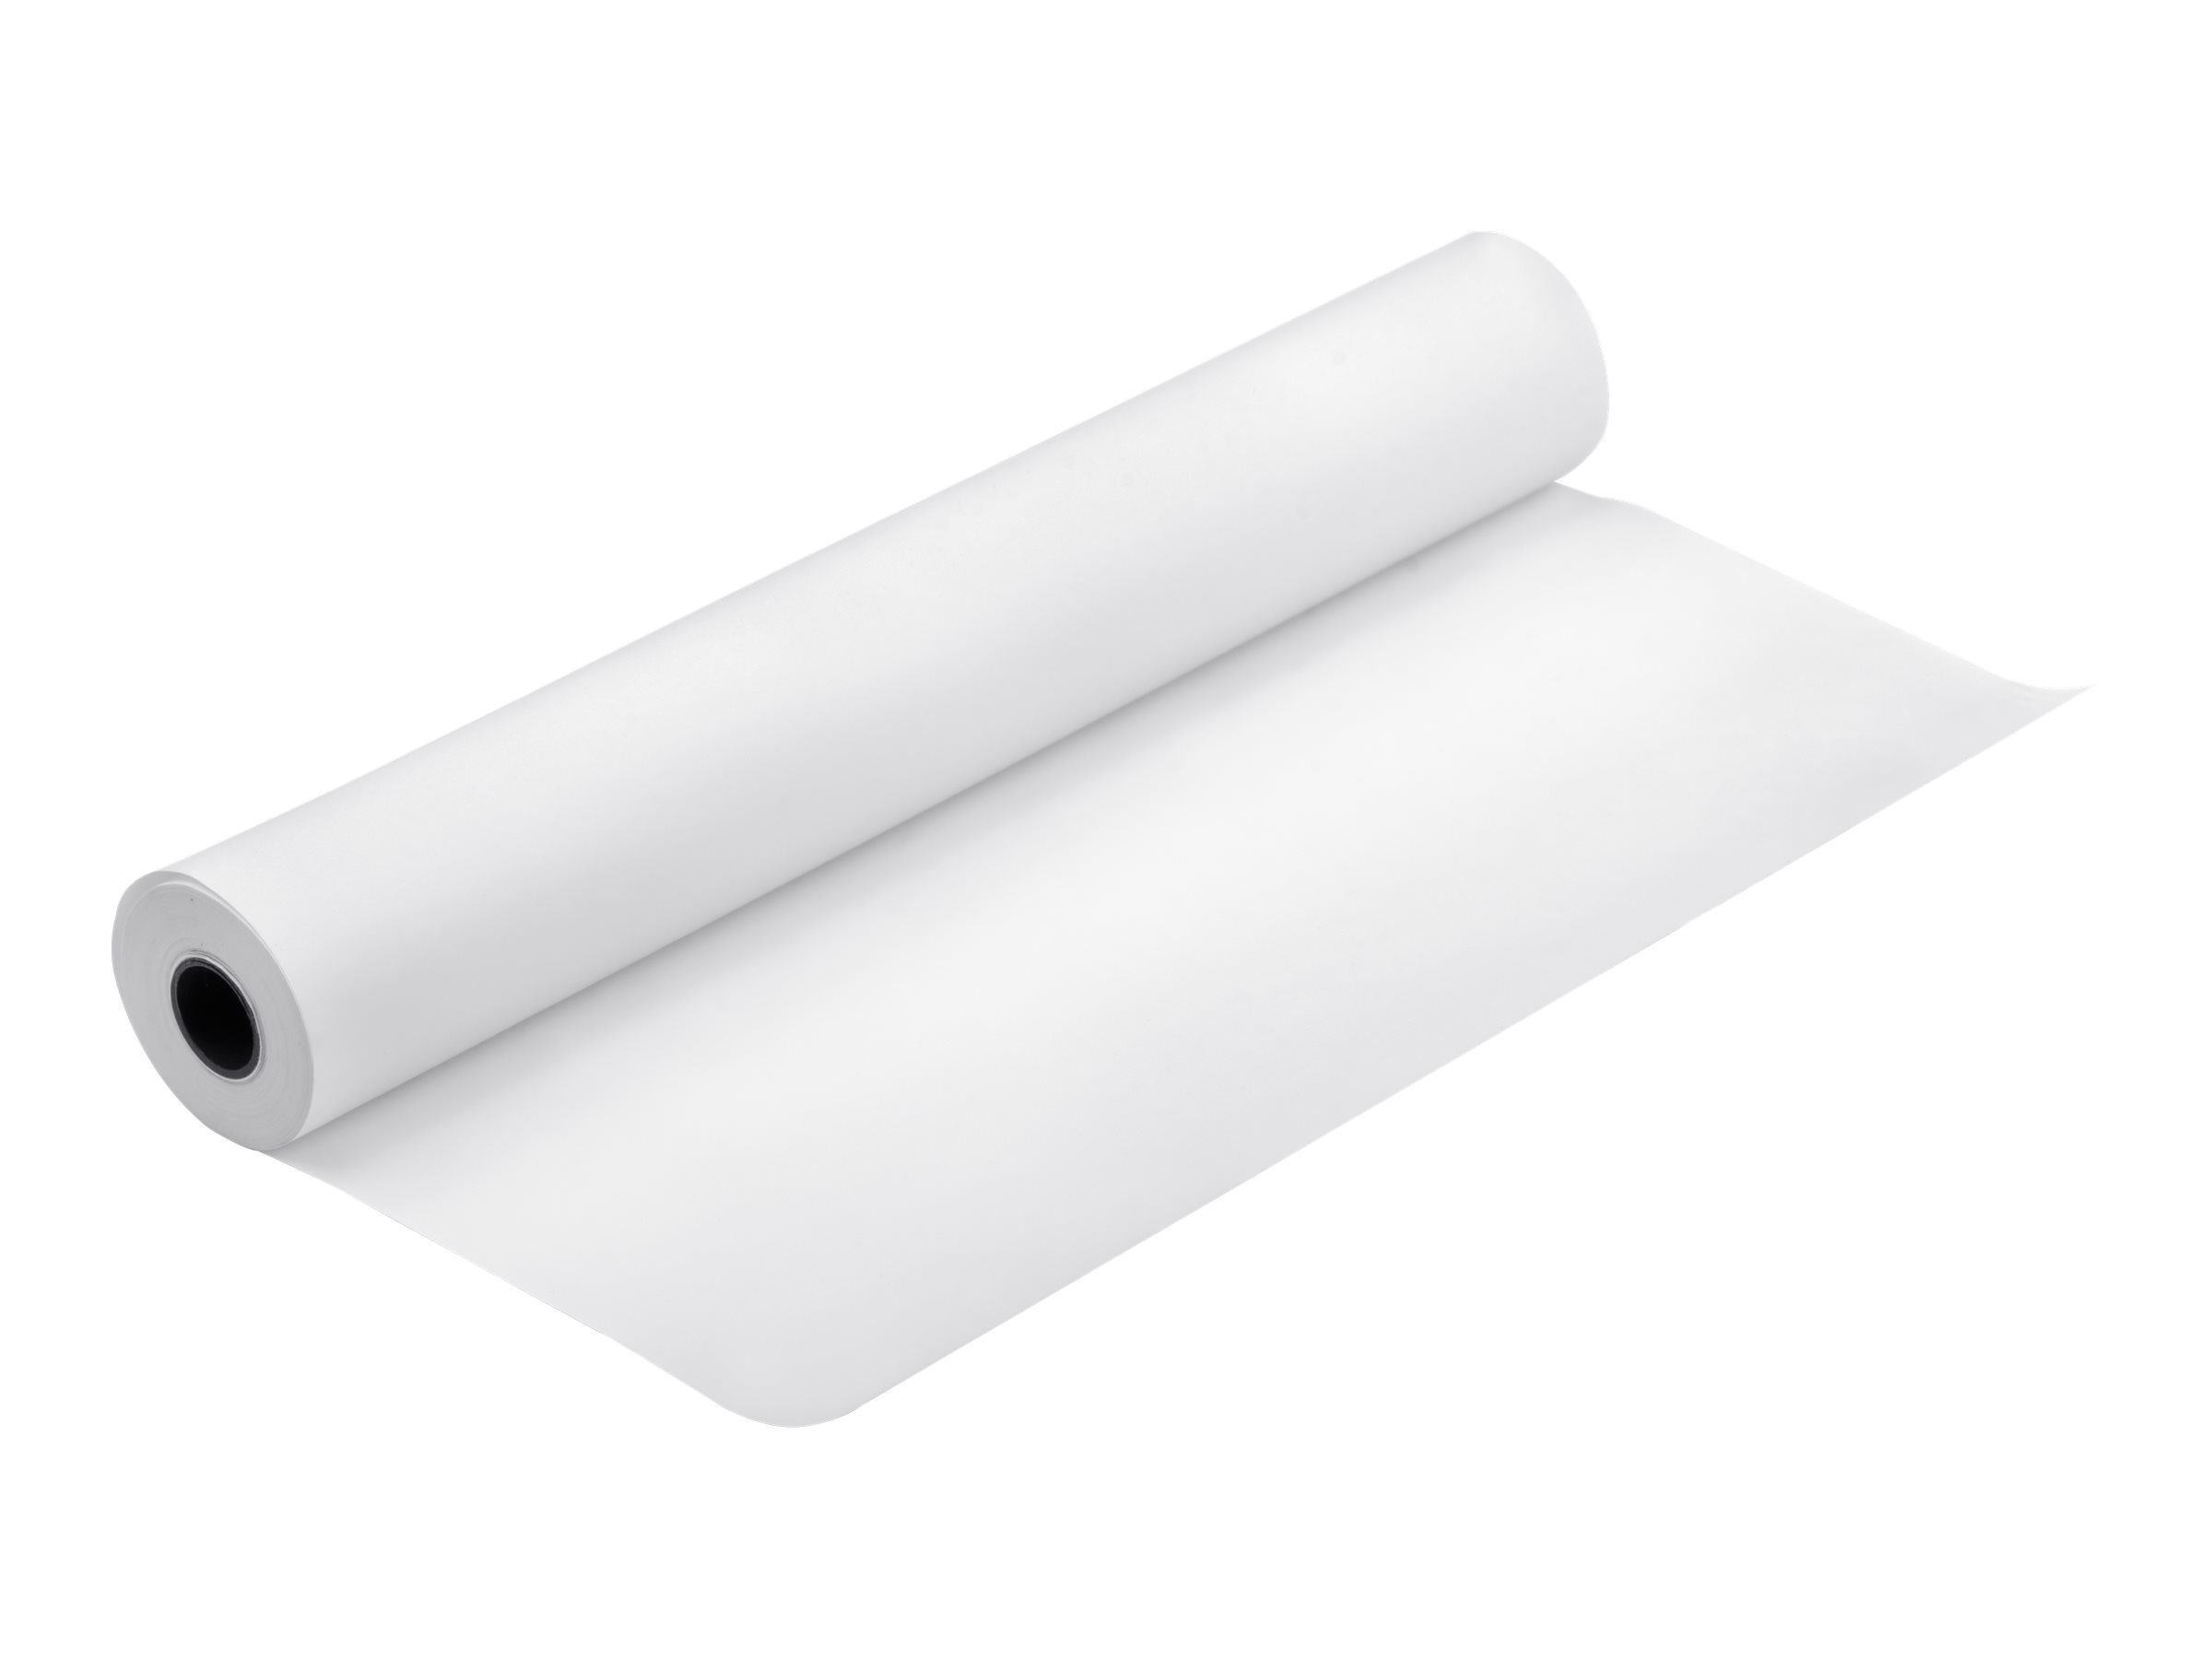 Epson UltraSmooth Fine Art - Baumwolle - Natural White - Rolle A1 (61,0 cm x 15,2 m) - 250 g/m - 1 Rolle(n) Faserpapier